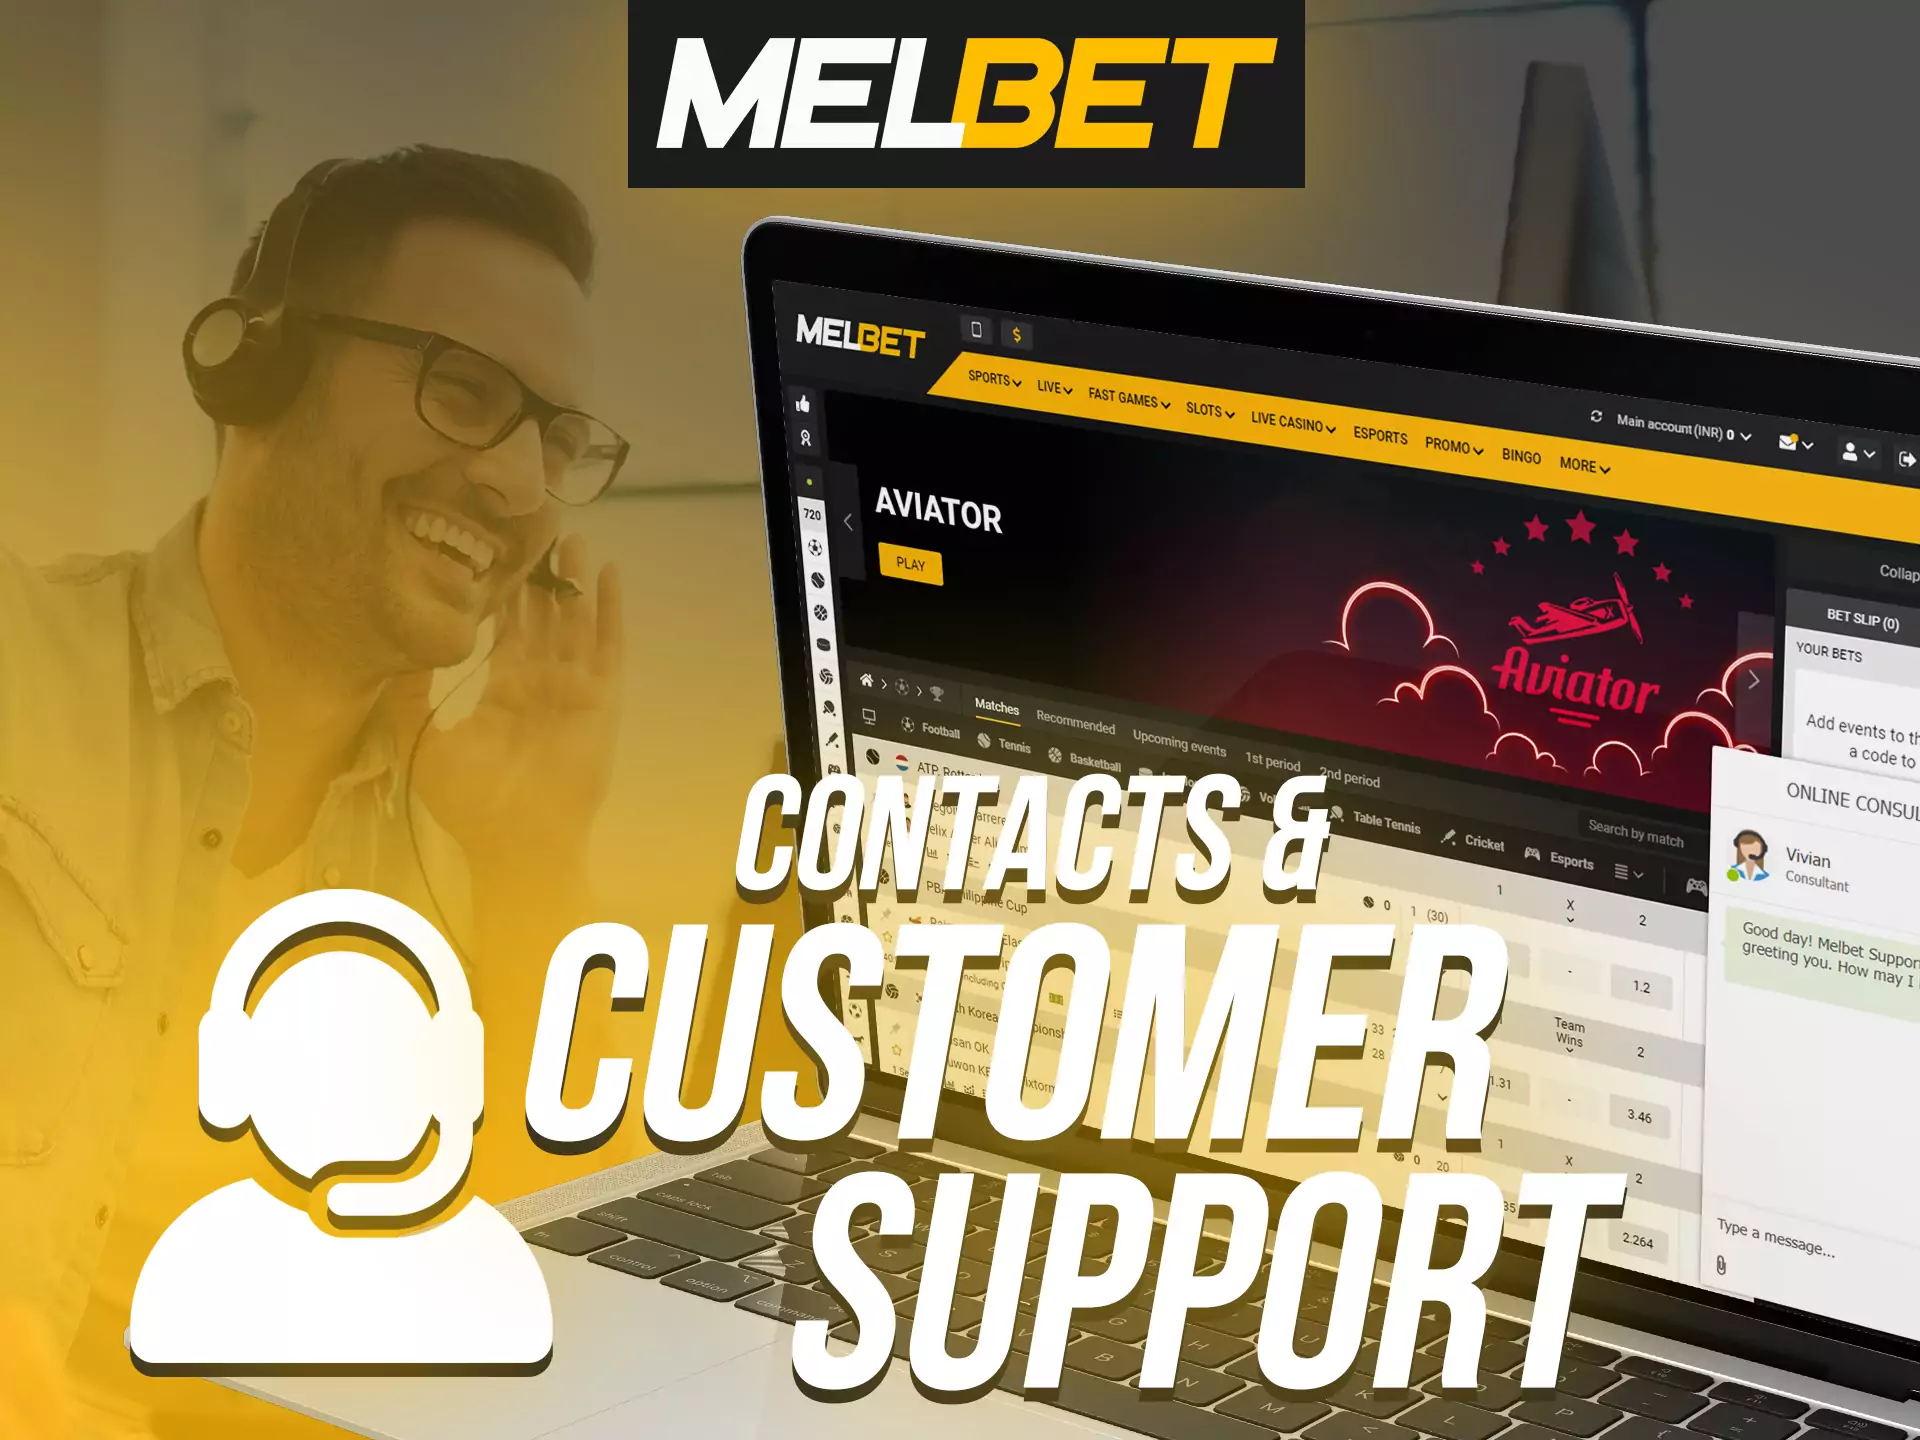 Ask any question to Melbet support if you struggle with something.